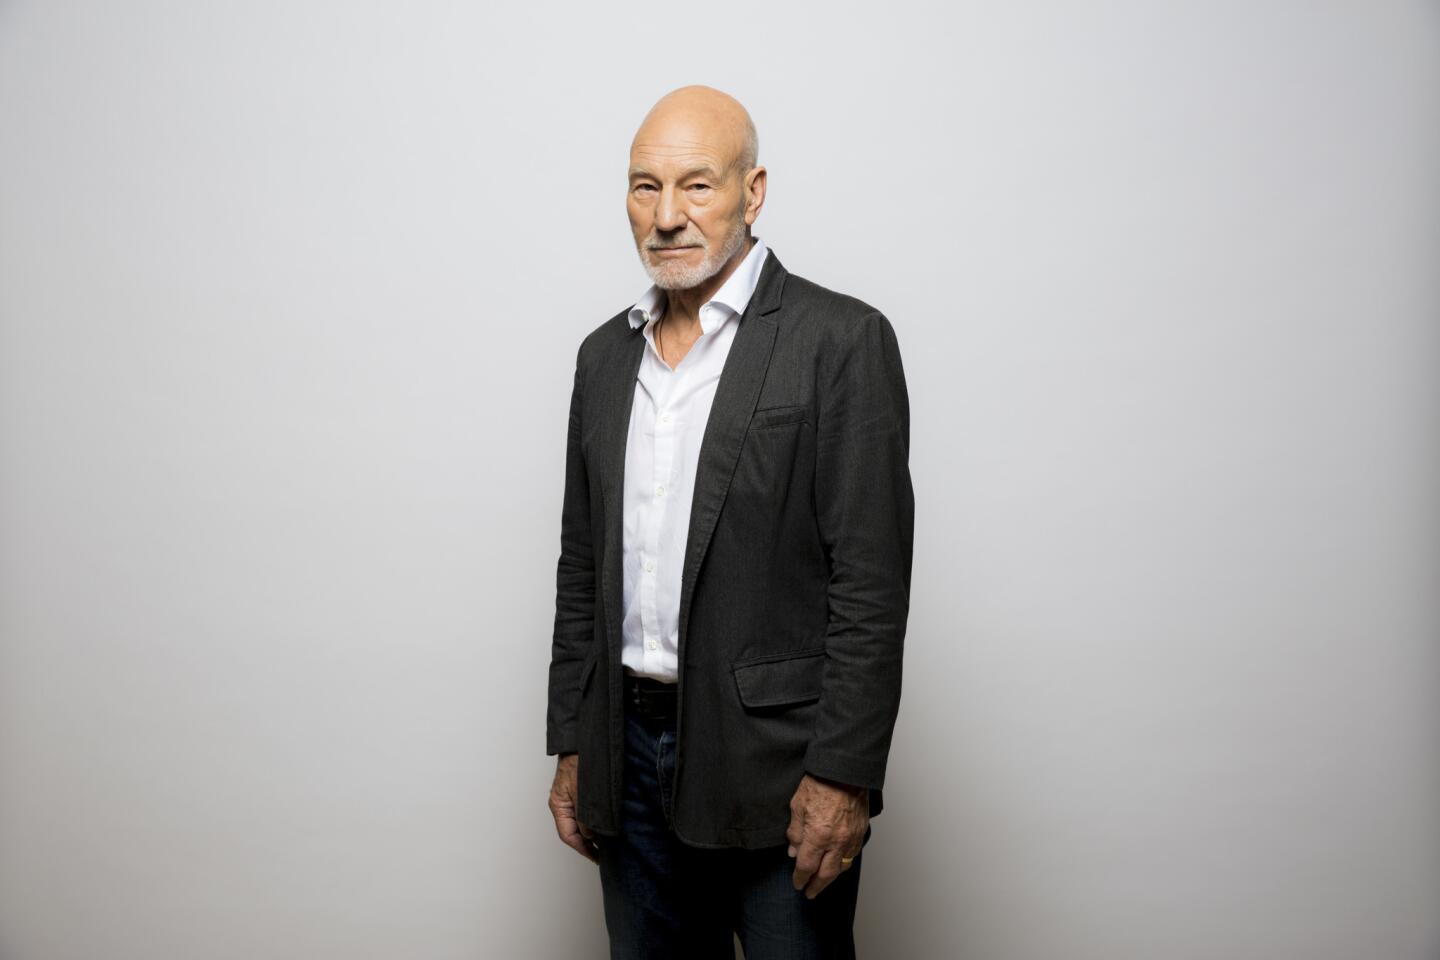 TORONTO, ON, CA--FRIDAY, SEPTEMBER 11, 2015-- Sir Patrick Stewart, from the movie "Green Room" photographed in the L.A. Times photo studio at the 40th Toronto International Film Festival, in Toronto, Ontario, Canada, on Friday, September 11, 2015. (Jay L. Clendenin / Los Angeles Times)